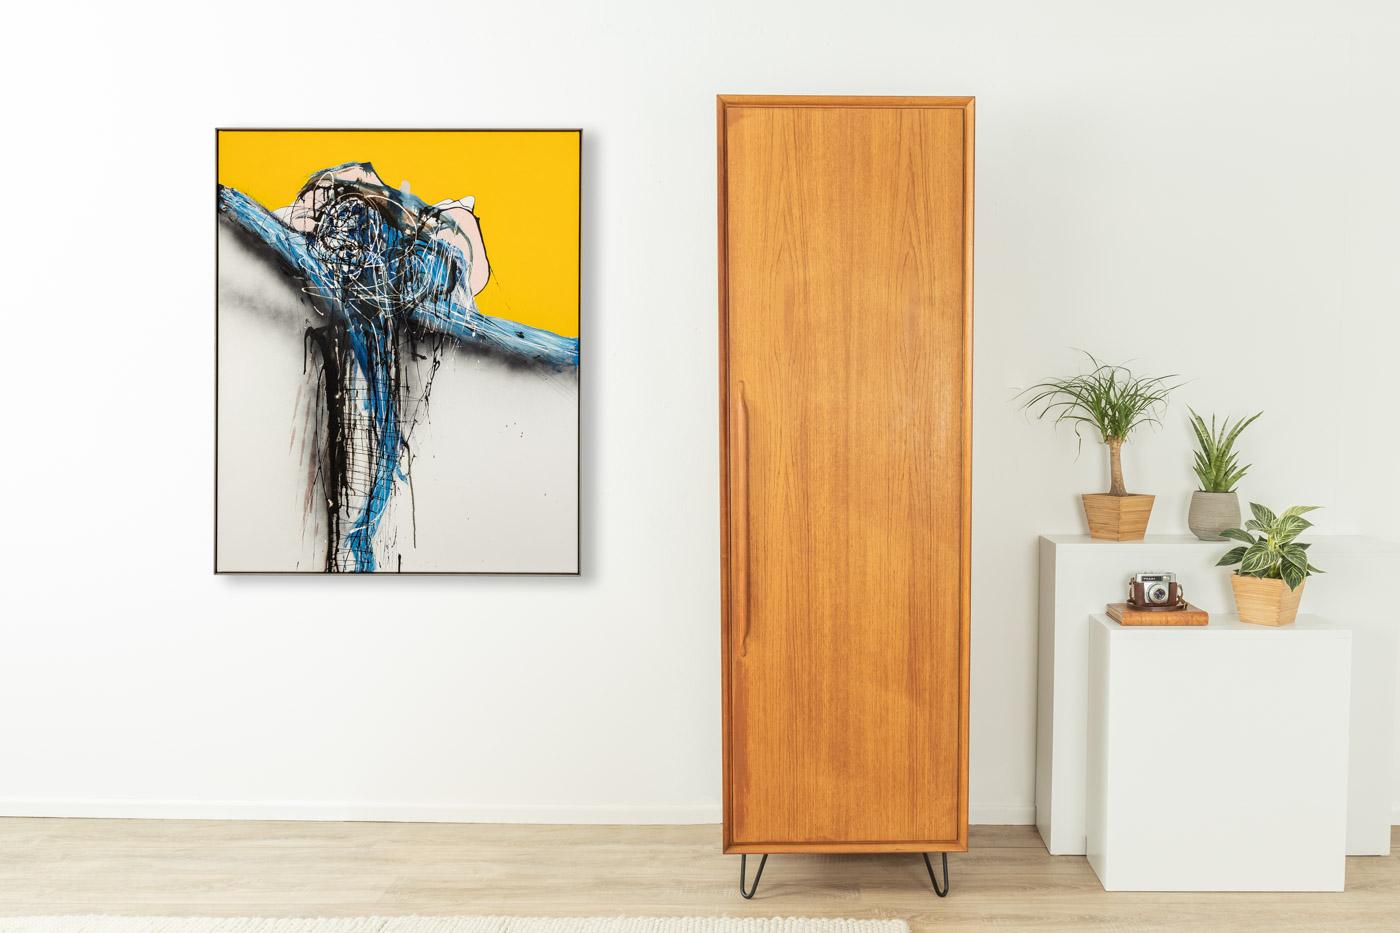 Detlef HAGENBÄUMER “Pop Queen”. Abstract depiction of a female body on a yellow and grey background. Oil/Acrylic on canvas framed in a high-quality, solid steel frame. Ready to hang.